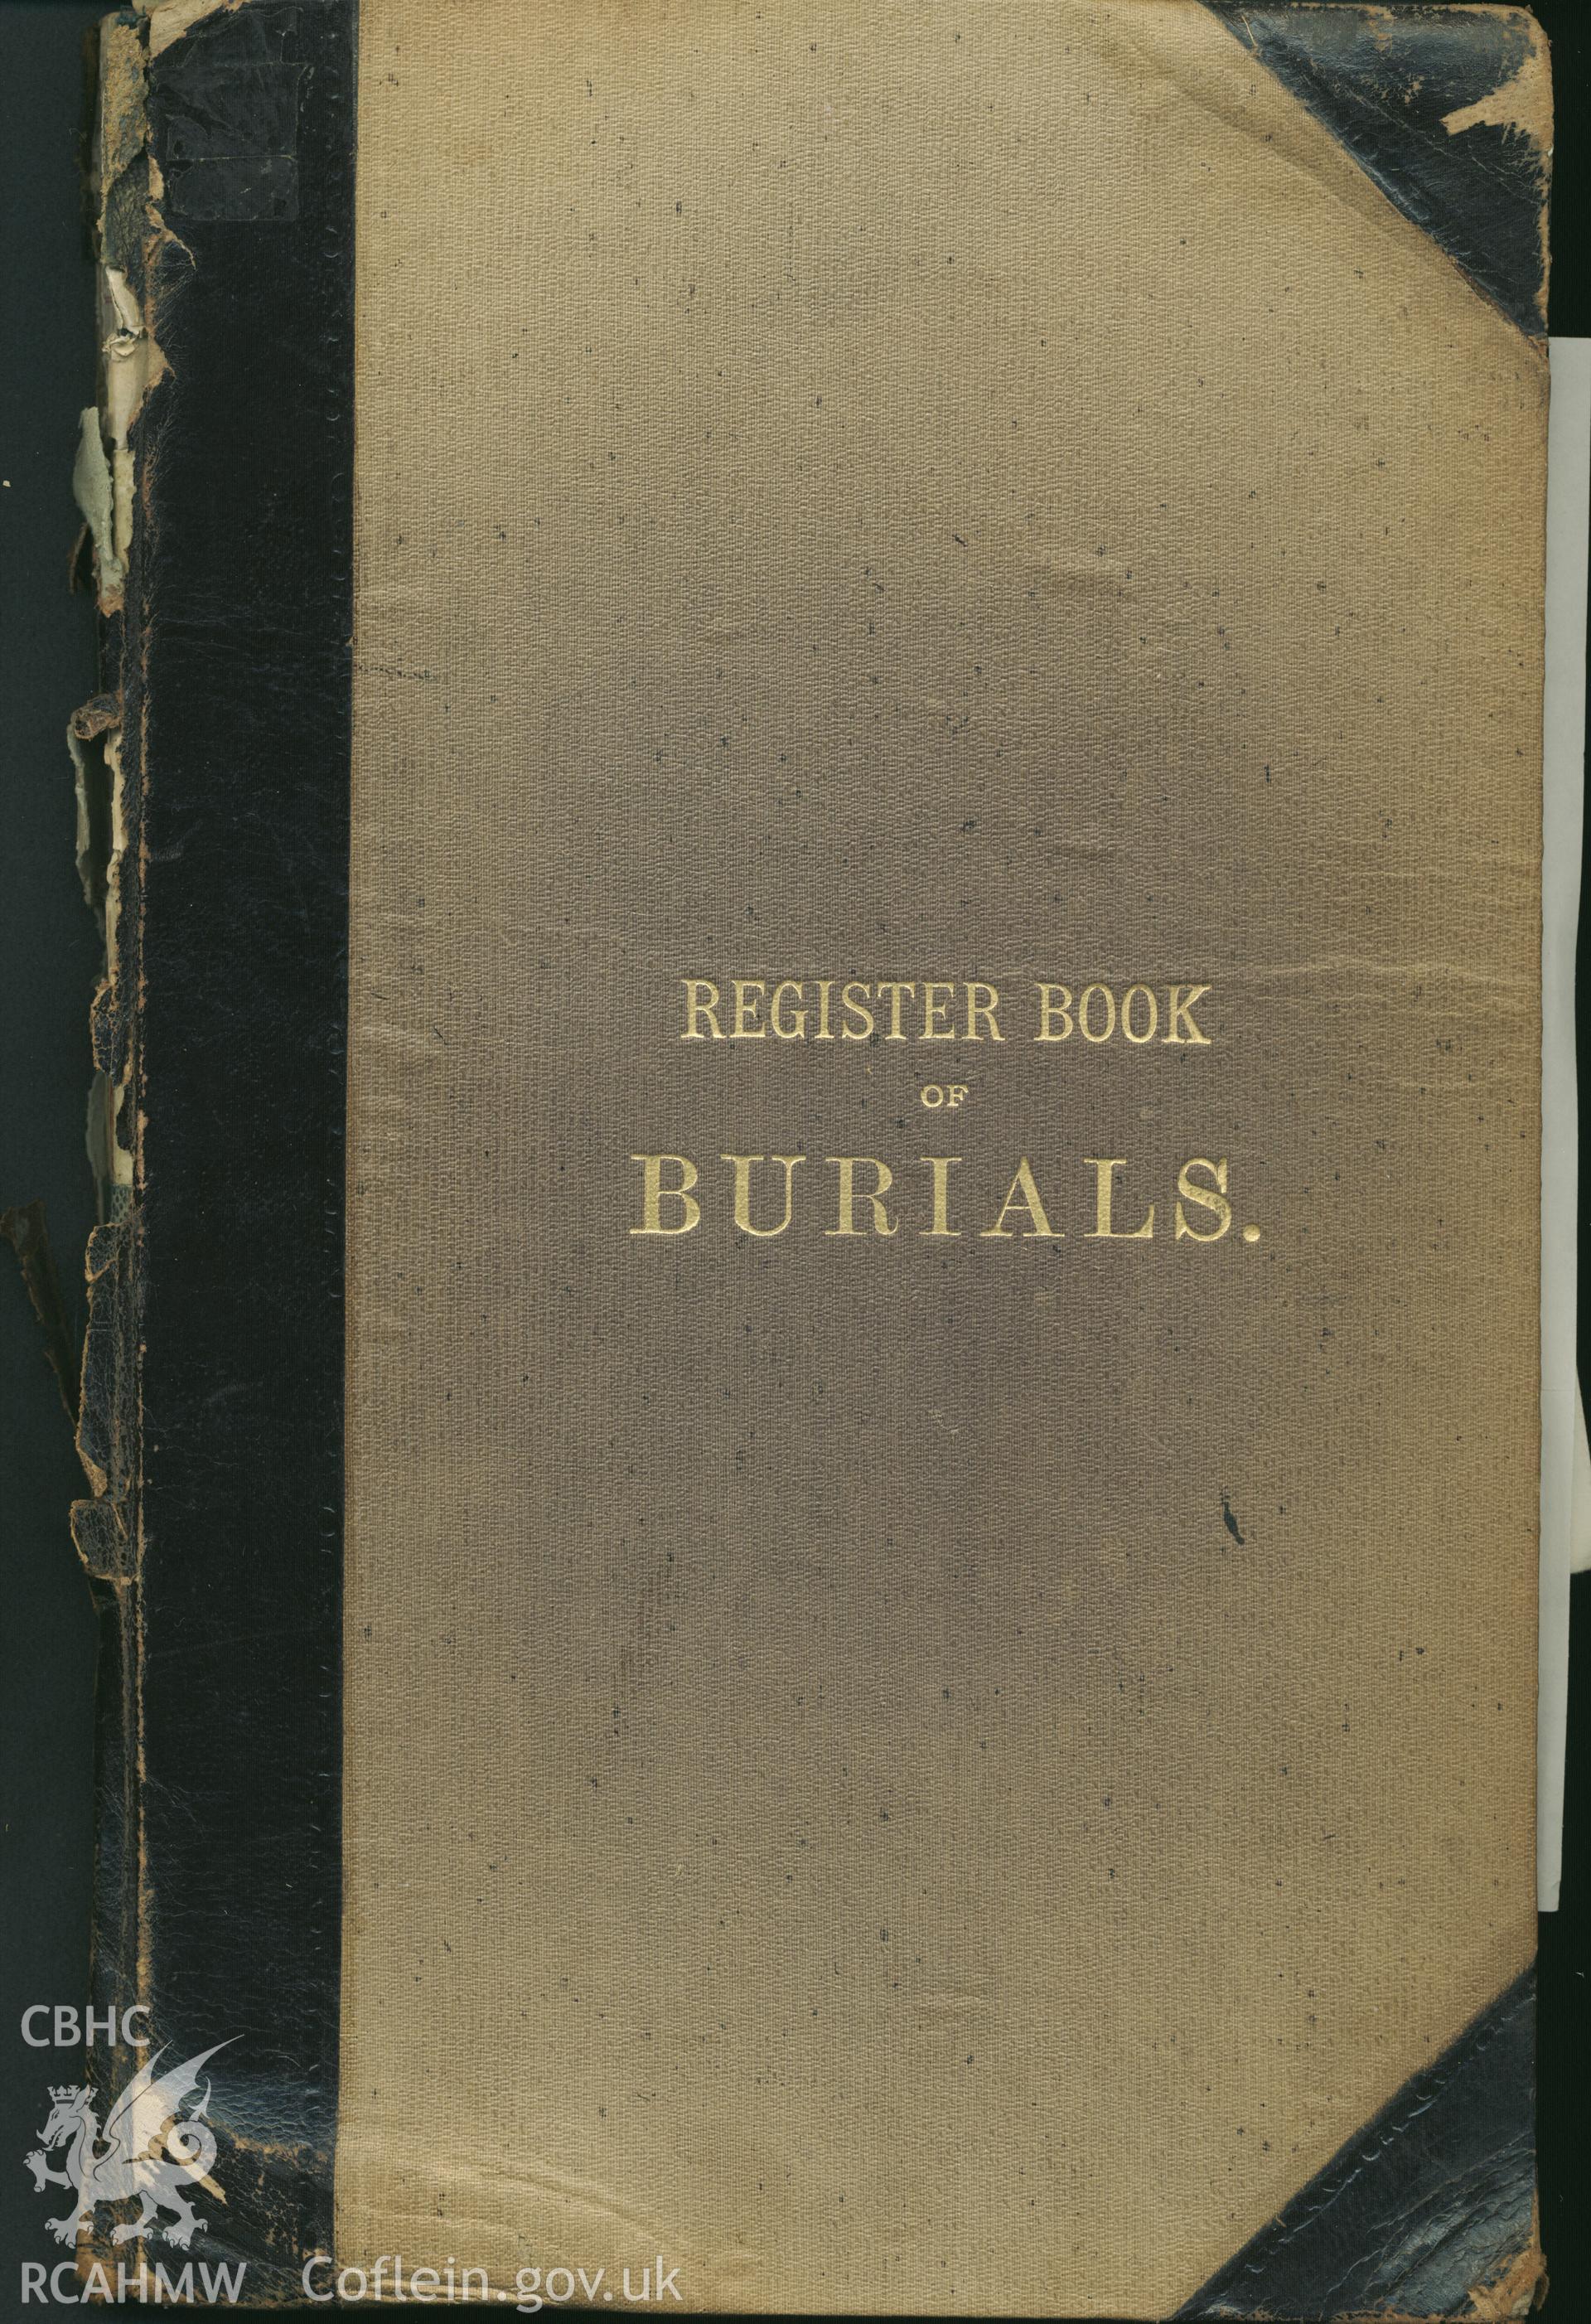 Scanned copy of cover, slightly damaged. Title: REGISTER BOOK of BURIALS. Donated to the RCAHMW as part of the Digital Dissent Project.